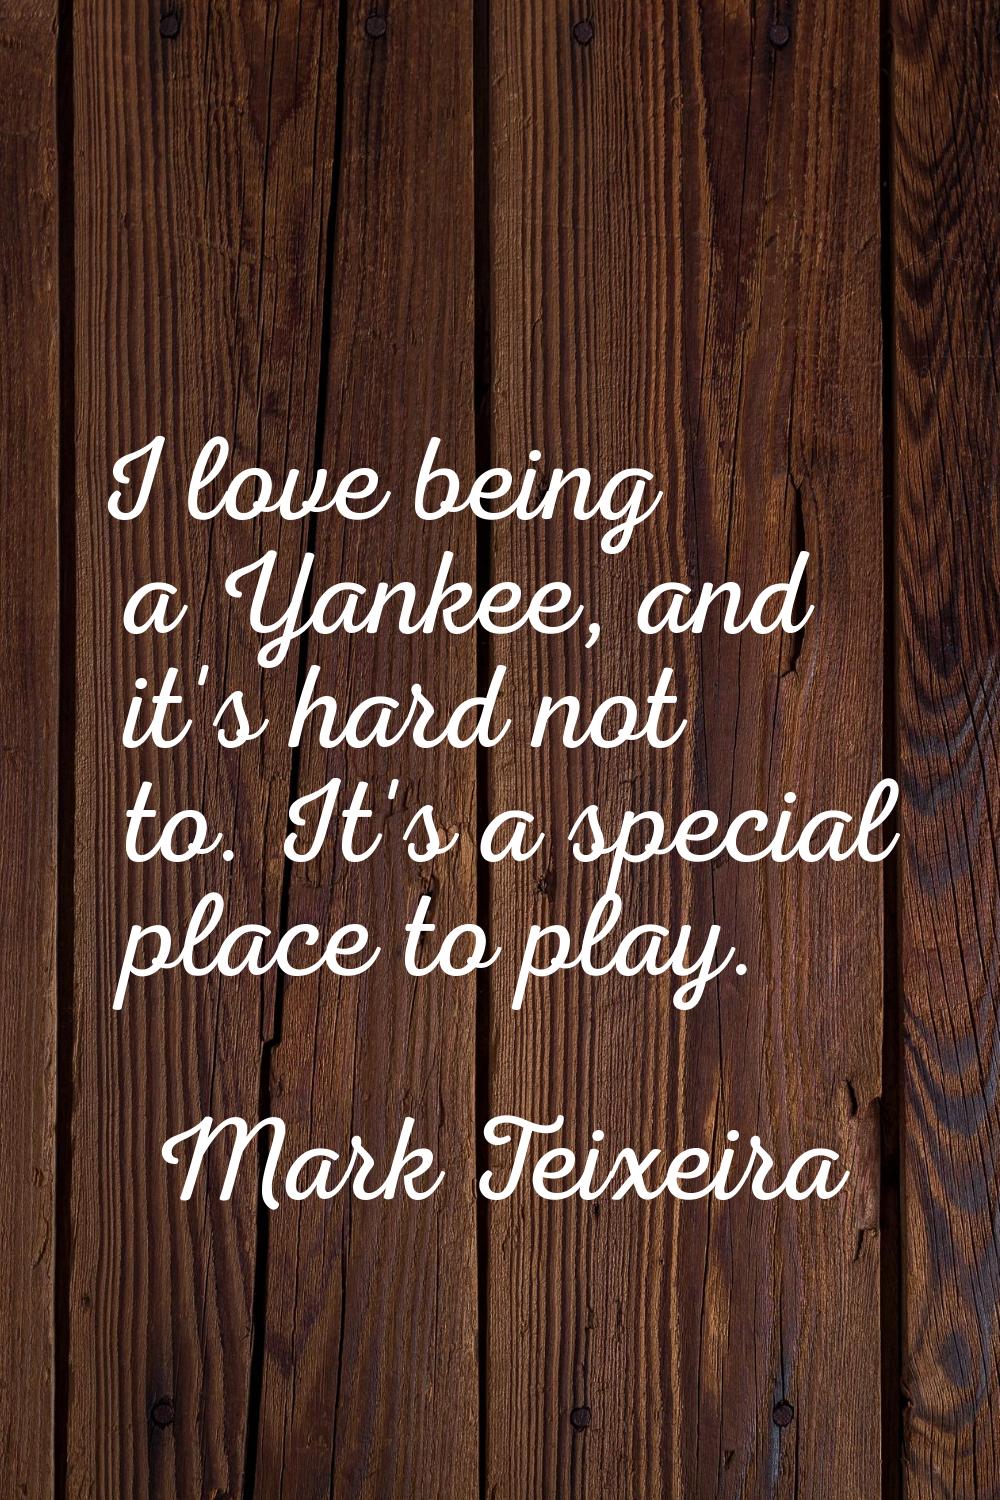 I love being a Yankee, and it's hard not to. It's a special place to play.